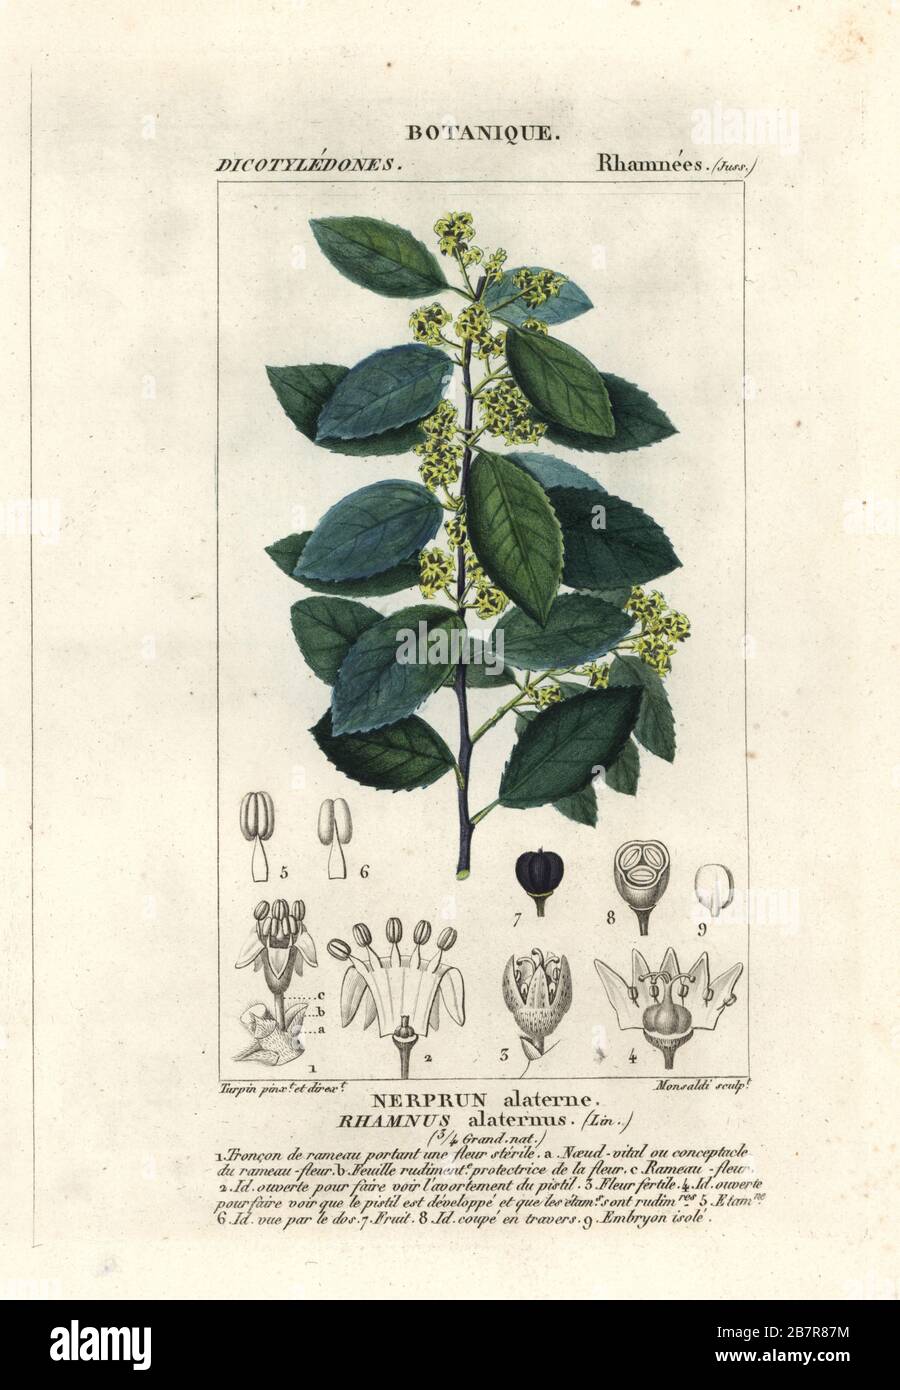 Italian buckthorn or Mediterranean buckthorn, Rhamnus alaternus. Nerprun alaterne. Handcoloured copperplate stipple engraving from Antoine Laurent de Jussieu's Dizionario delle Scienze Naturali, Dictionary of Natural Science, Florence, Italy, 1837. Illustration engraved by Monsaldi, drawn and directed by Pierre Jean-Francois Turpin, and published by Batelli e Figli. Turpin (1775-1840) is considered one of the greatest French botanical illustrators of the 19th century. Stock Photo